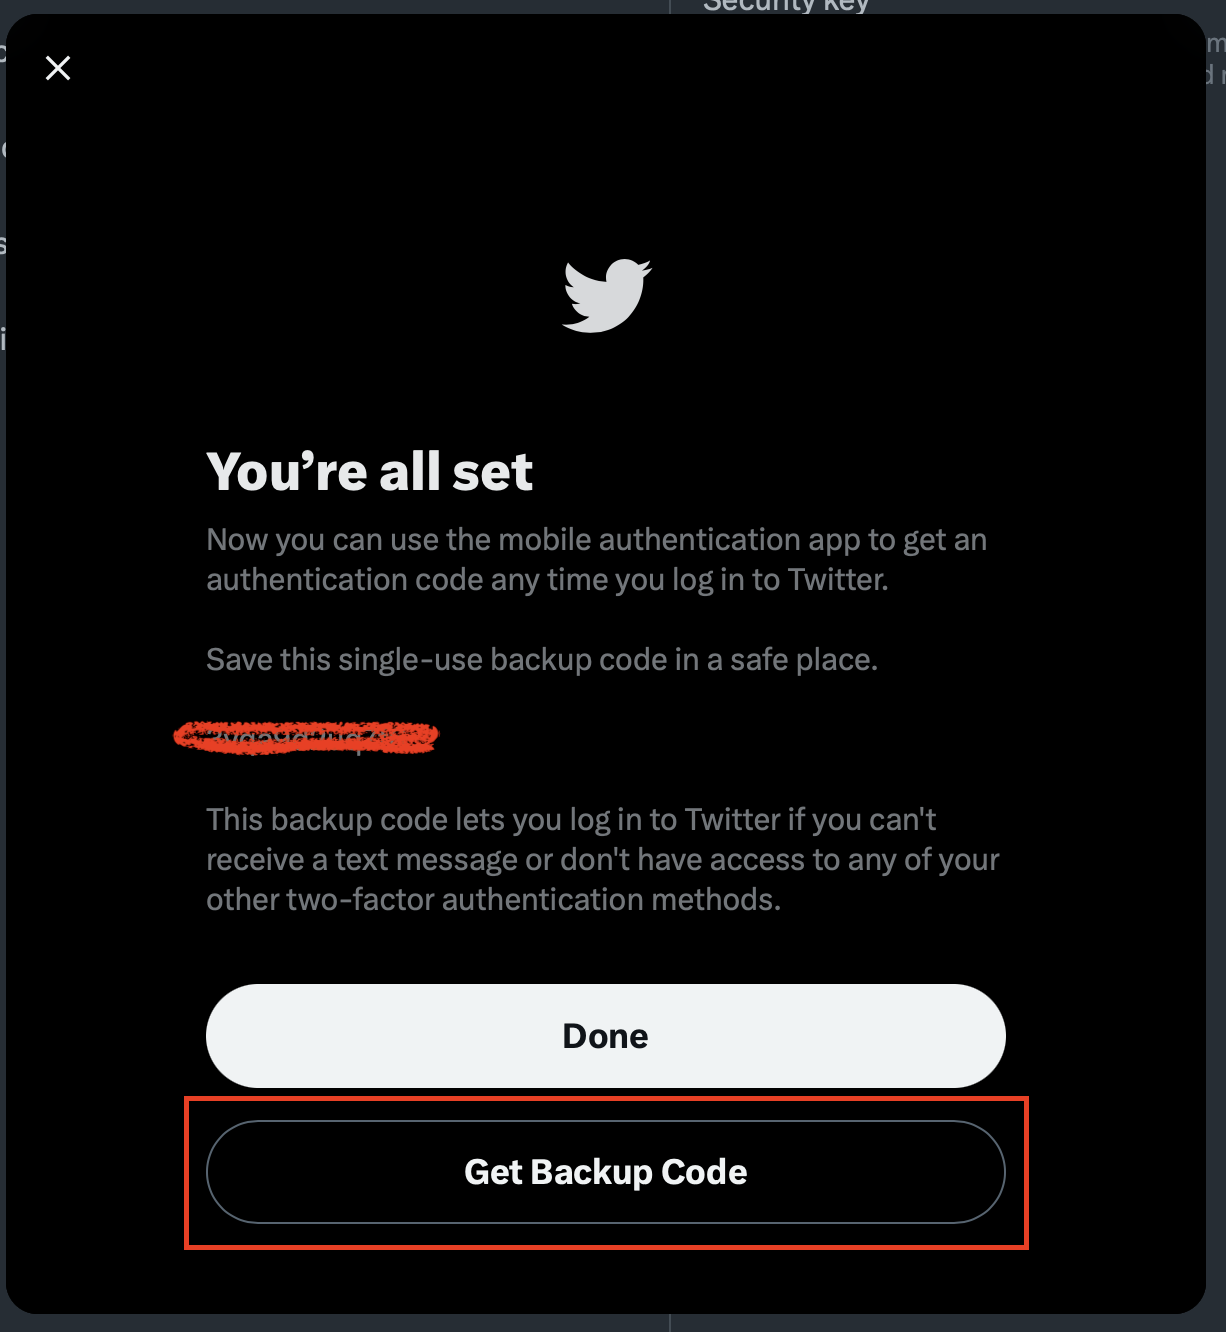 When you get to the You're all set screen, click on "Get Backup Code".